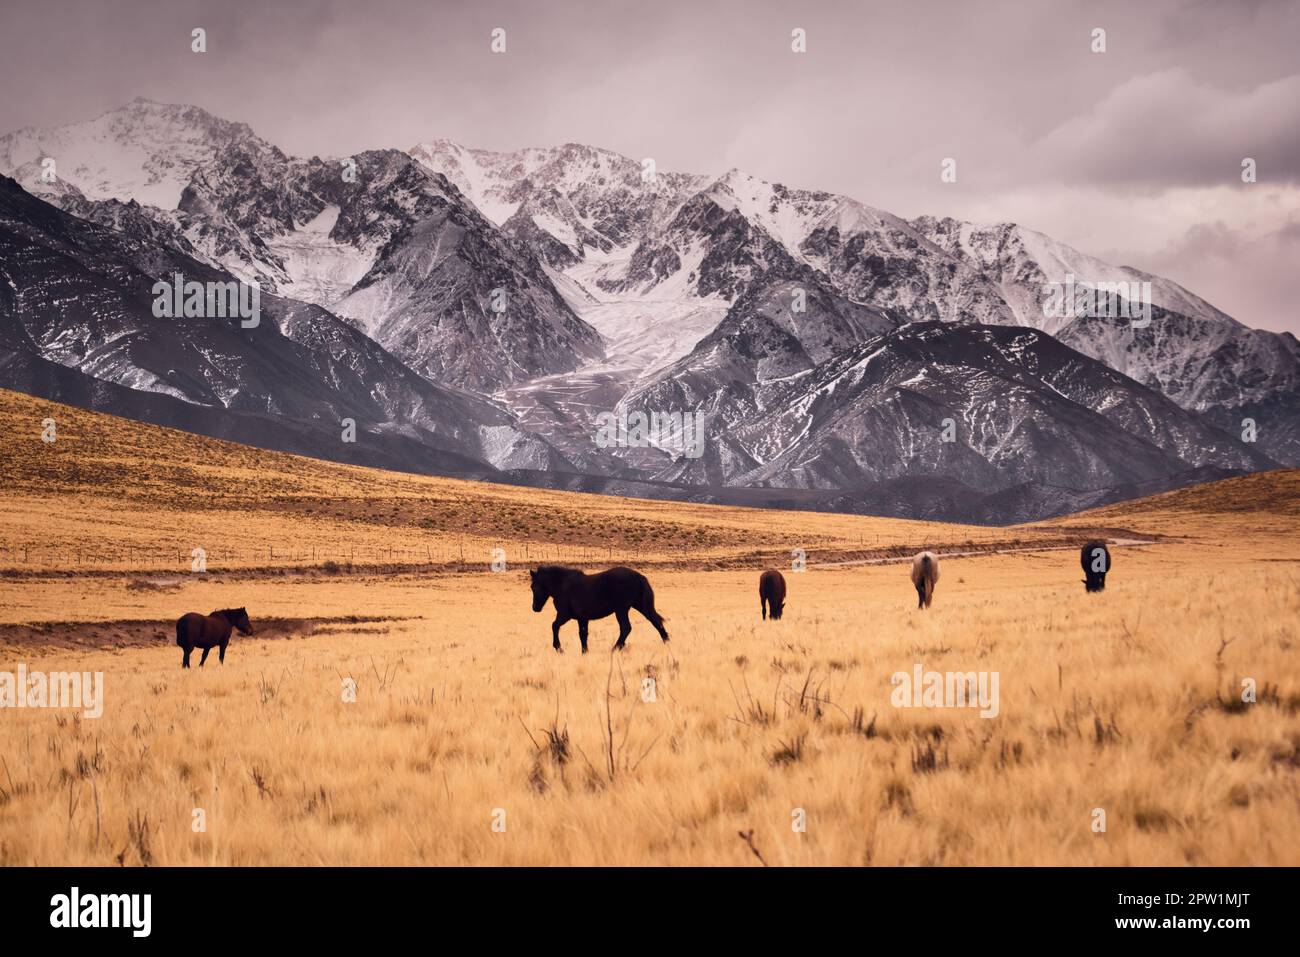 Horses galloping across a cold grassland by the snowy, craggy Andes mountains in Valle de Uco, Mendoza, Argentina. Stock Photo